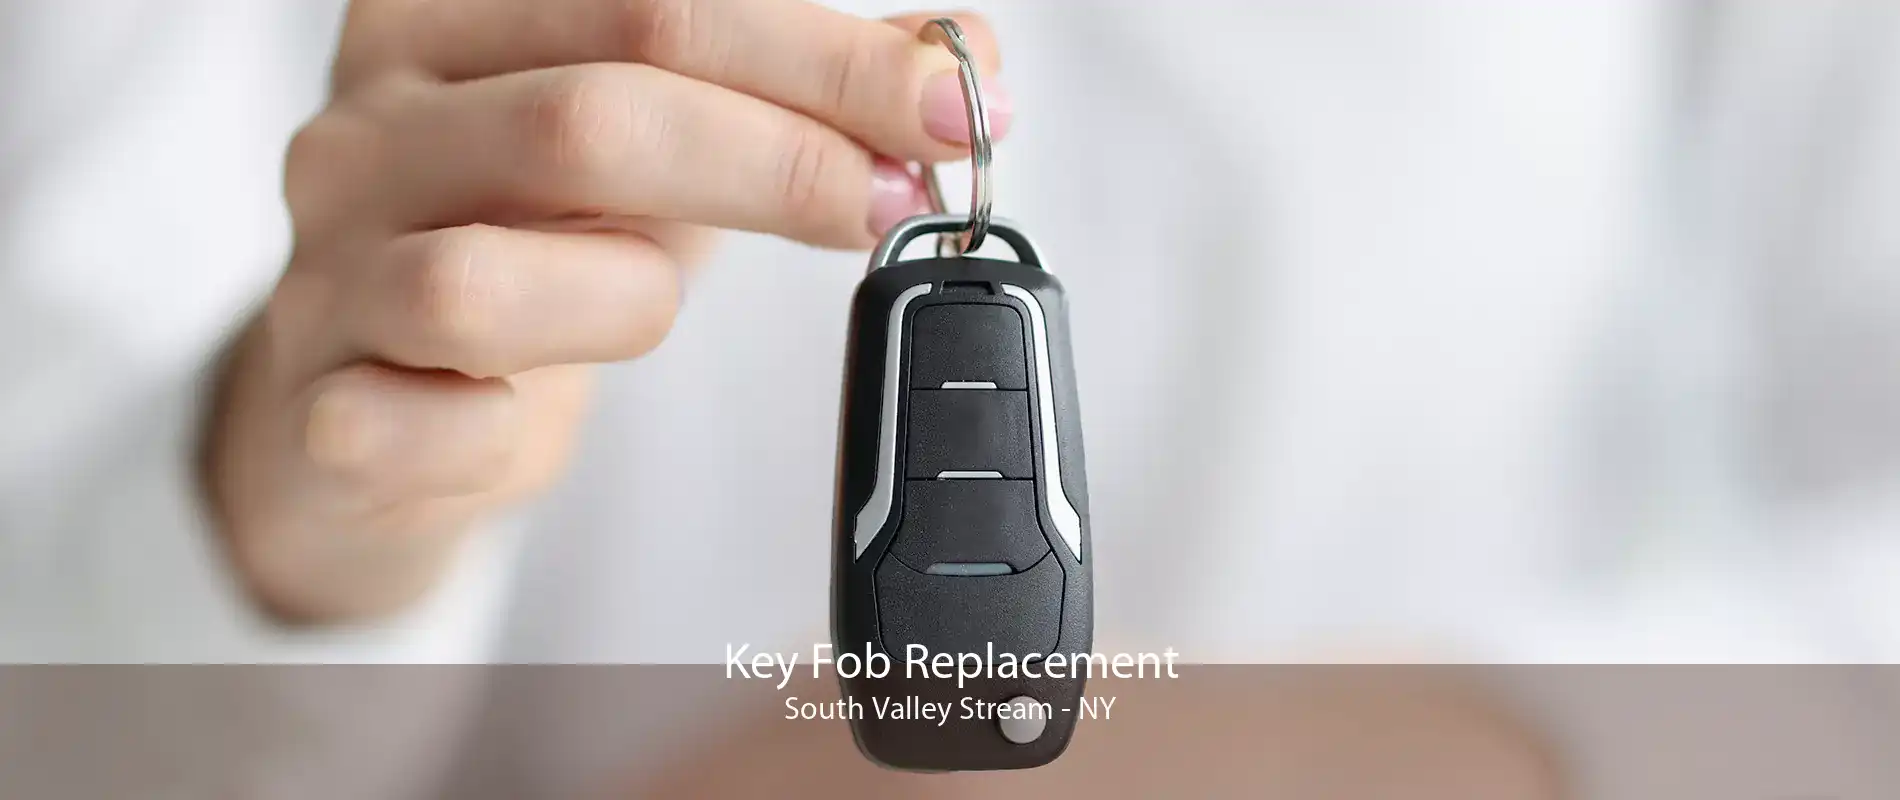 Key Fob Replacement South Valley Stream - NY